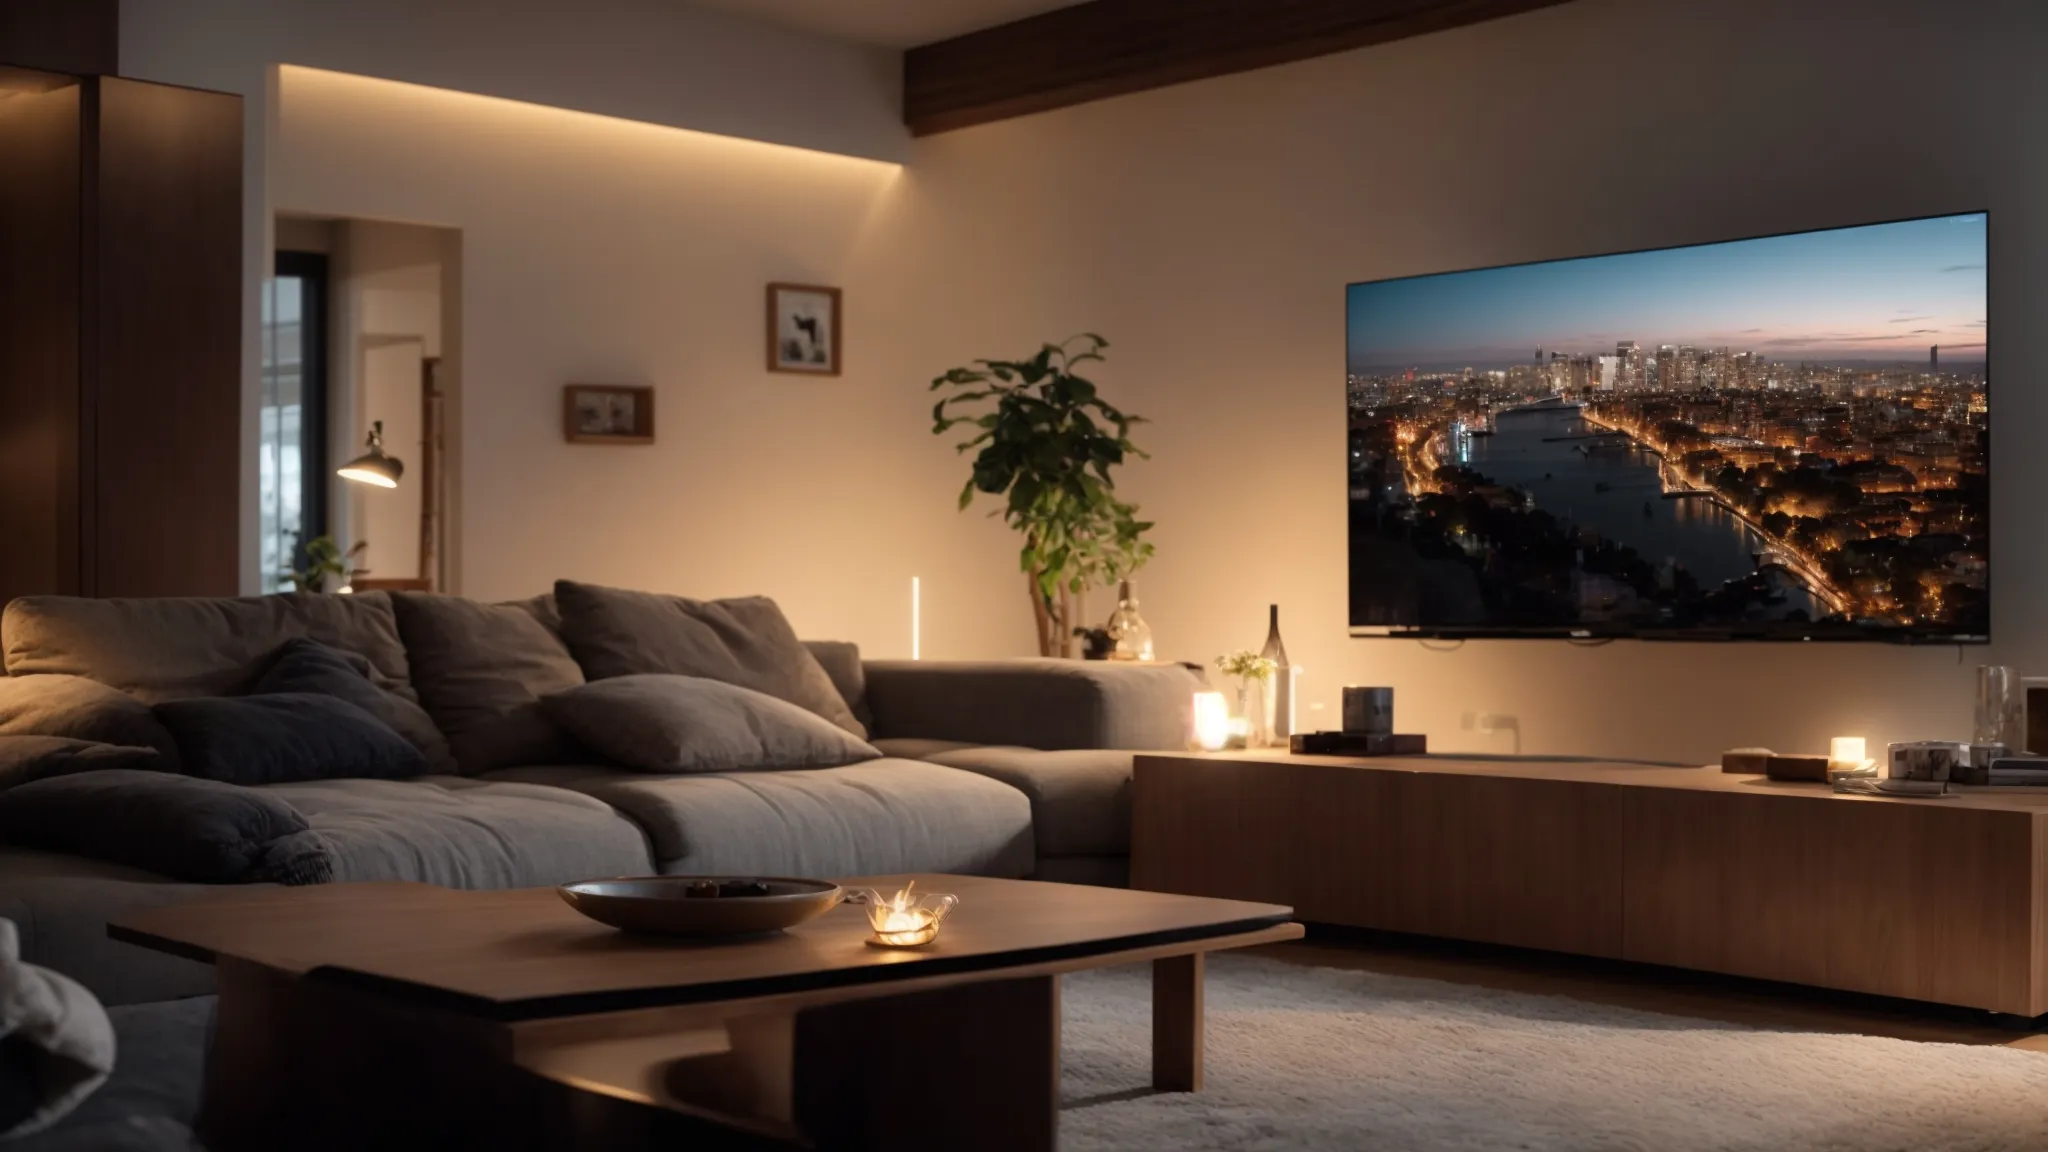 a cozy living room illuminated by the glow of a high-definition smart tv displaying a captivating movie scene, with various streaming devices visible on the coffee table.